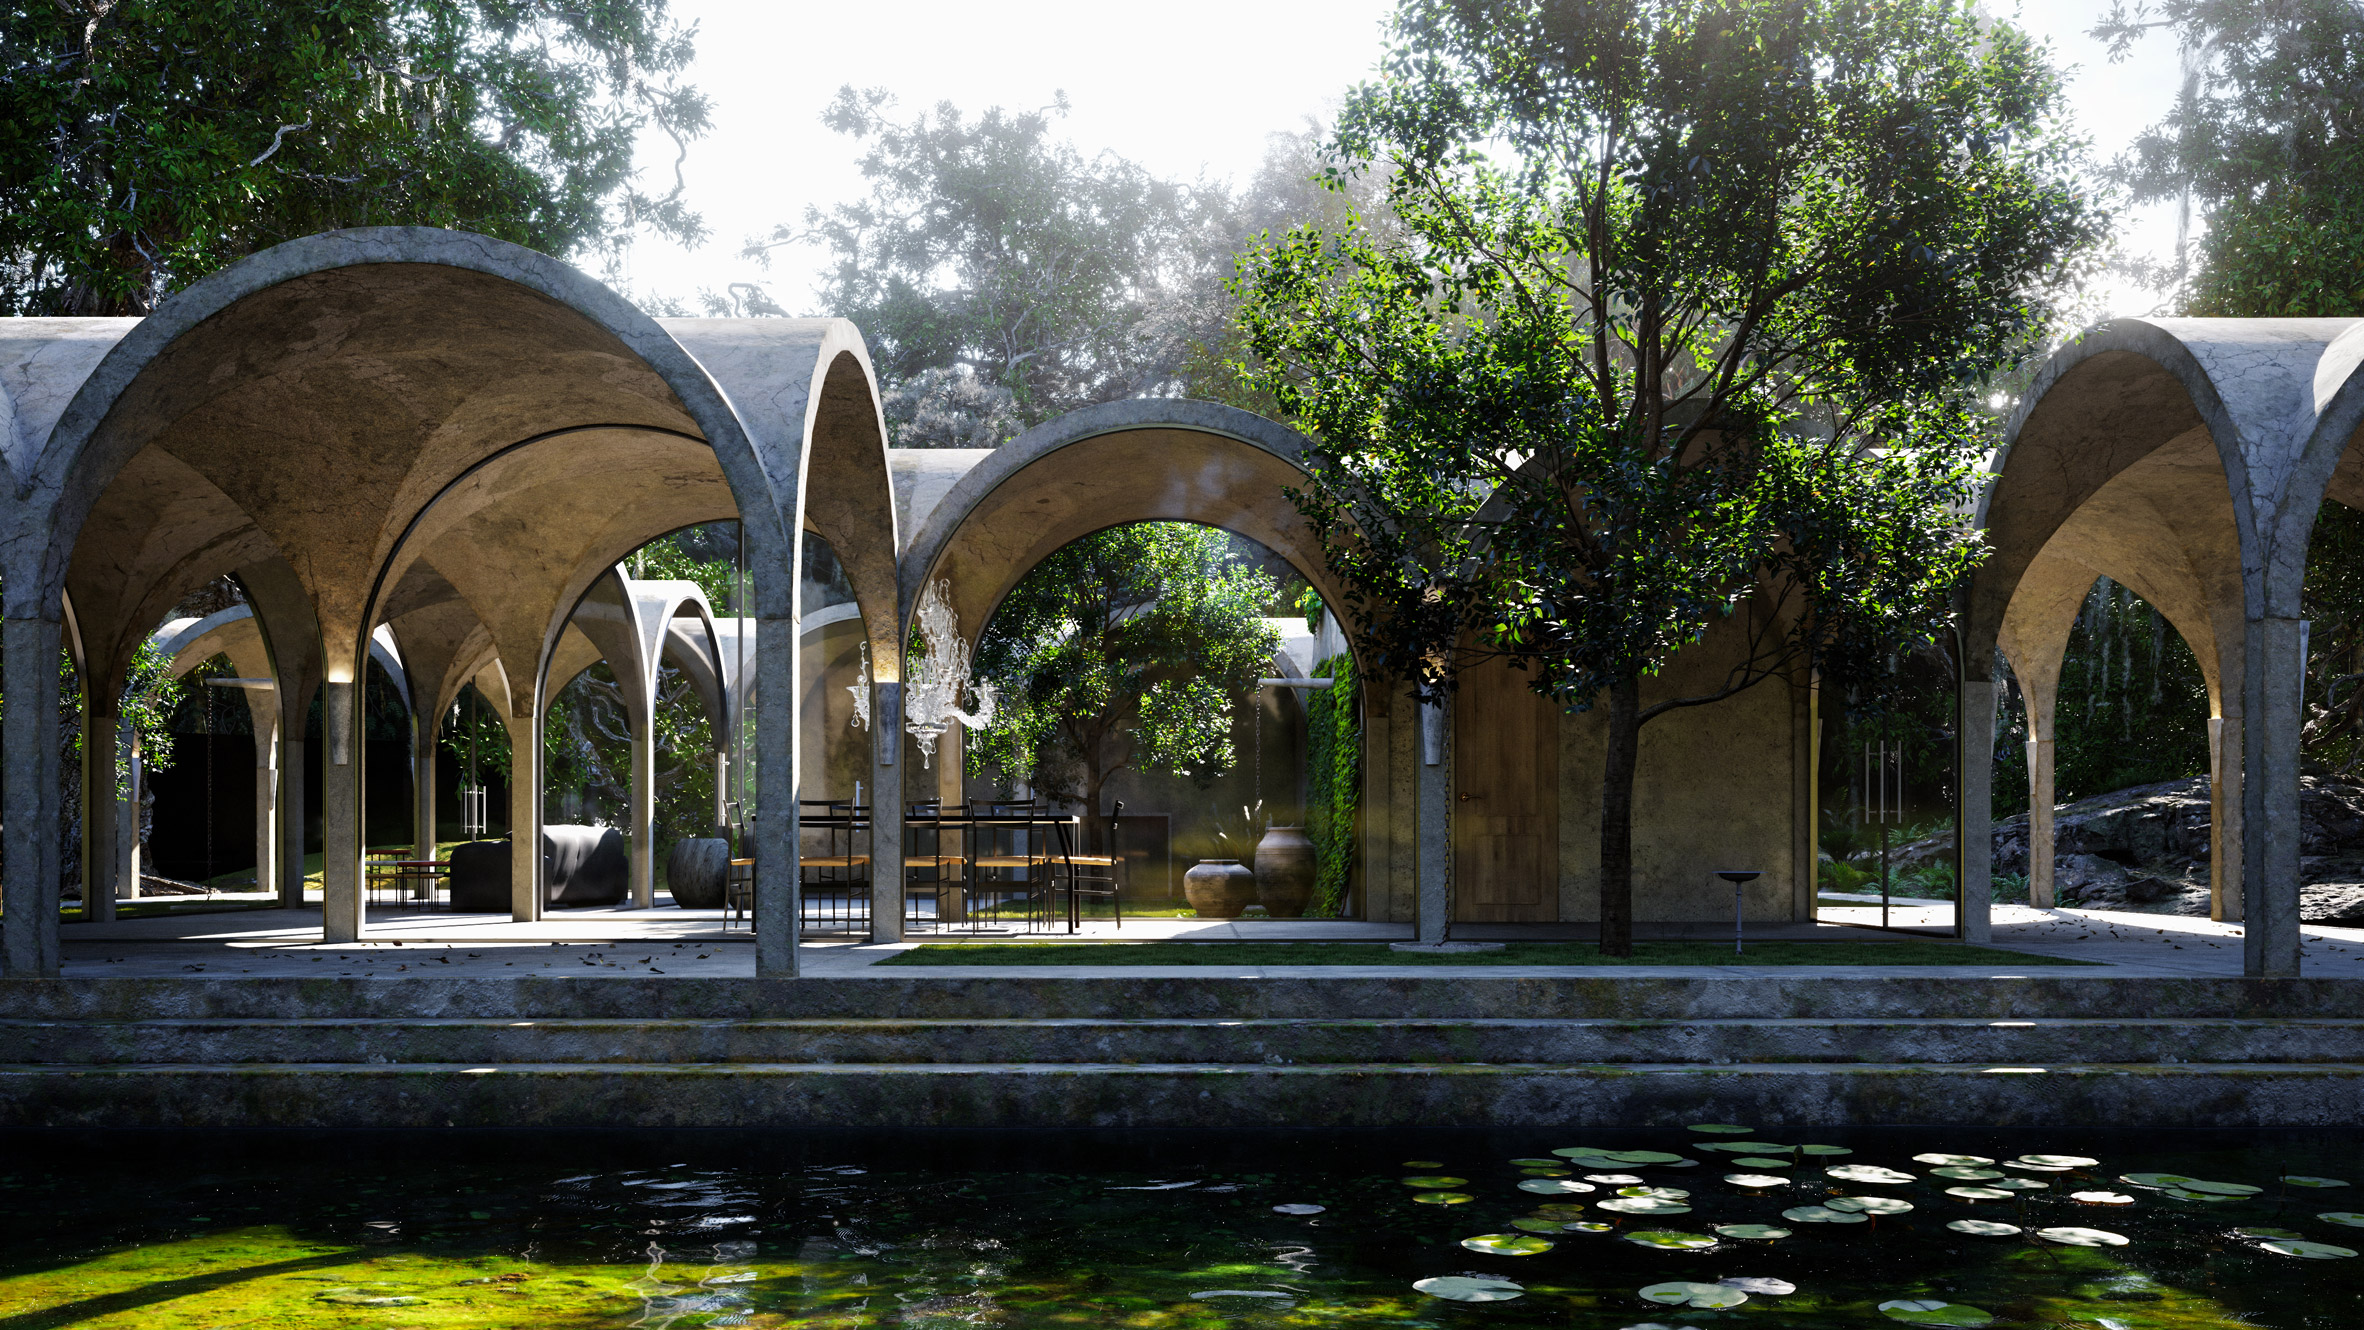 Virtual house by Marc Thorpe with vaulted arches